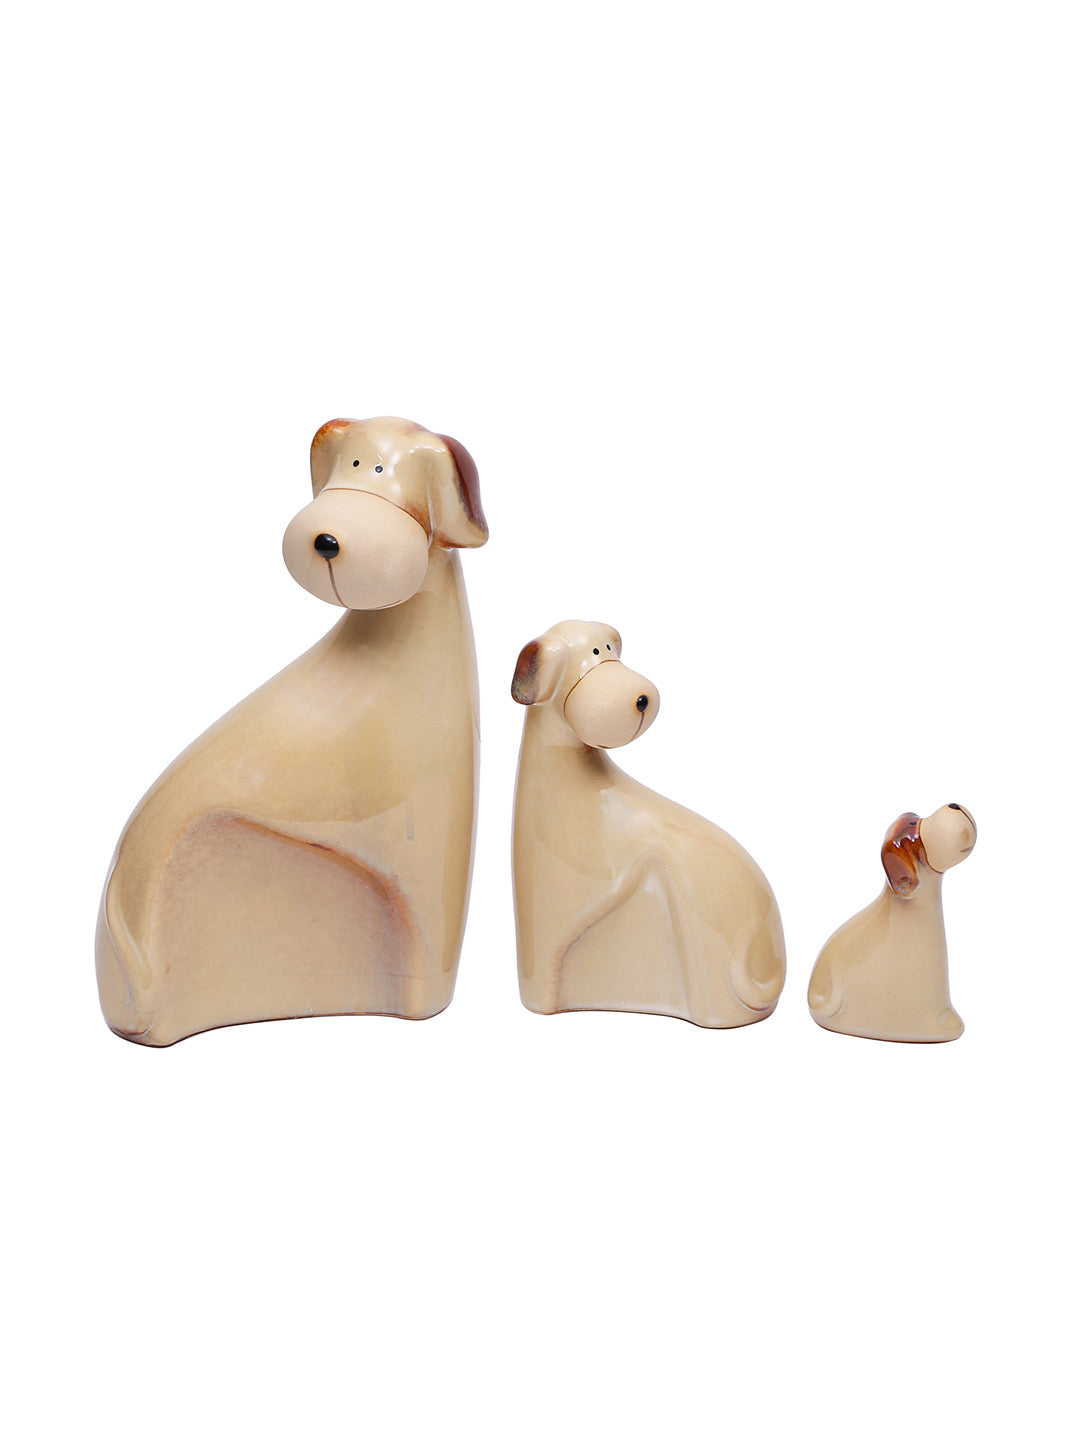 Endearing and Lovable Dogs and Puppies Ceramic Set - Default Title (SHOW19549)